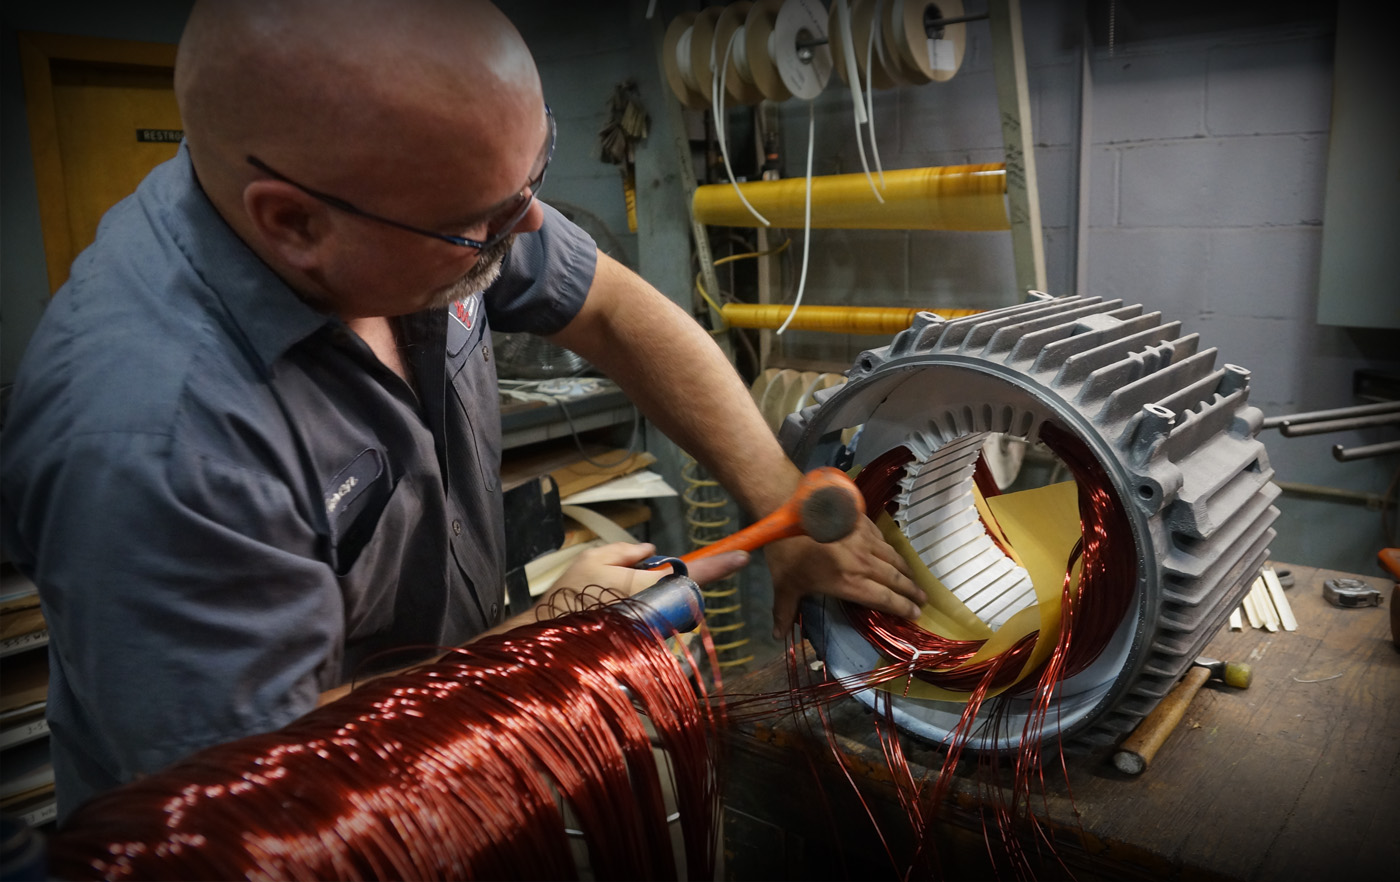 We offer the BEST in Electric Motor Sales and Service